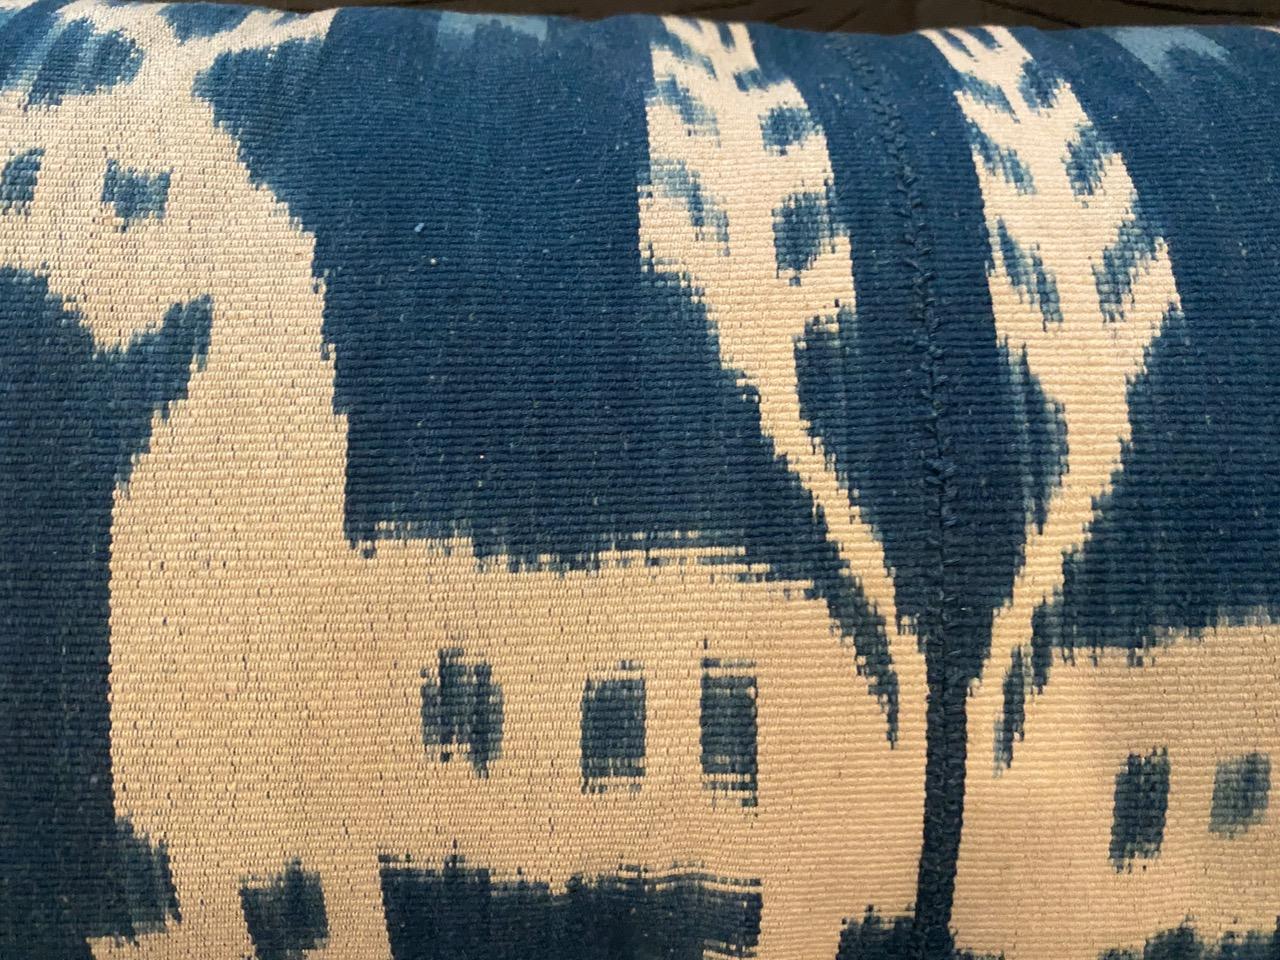 Antique indigo and white textile from Sumba. Ikat is an ancient technique which is used to add patterns to textiles. The designs are created in the yarns rather than on the finished cloth, resulting in both sides patterned with bold contrasting